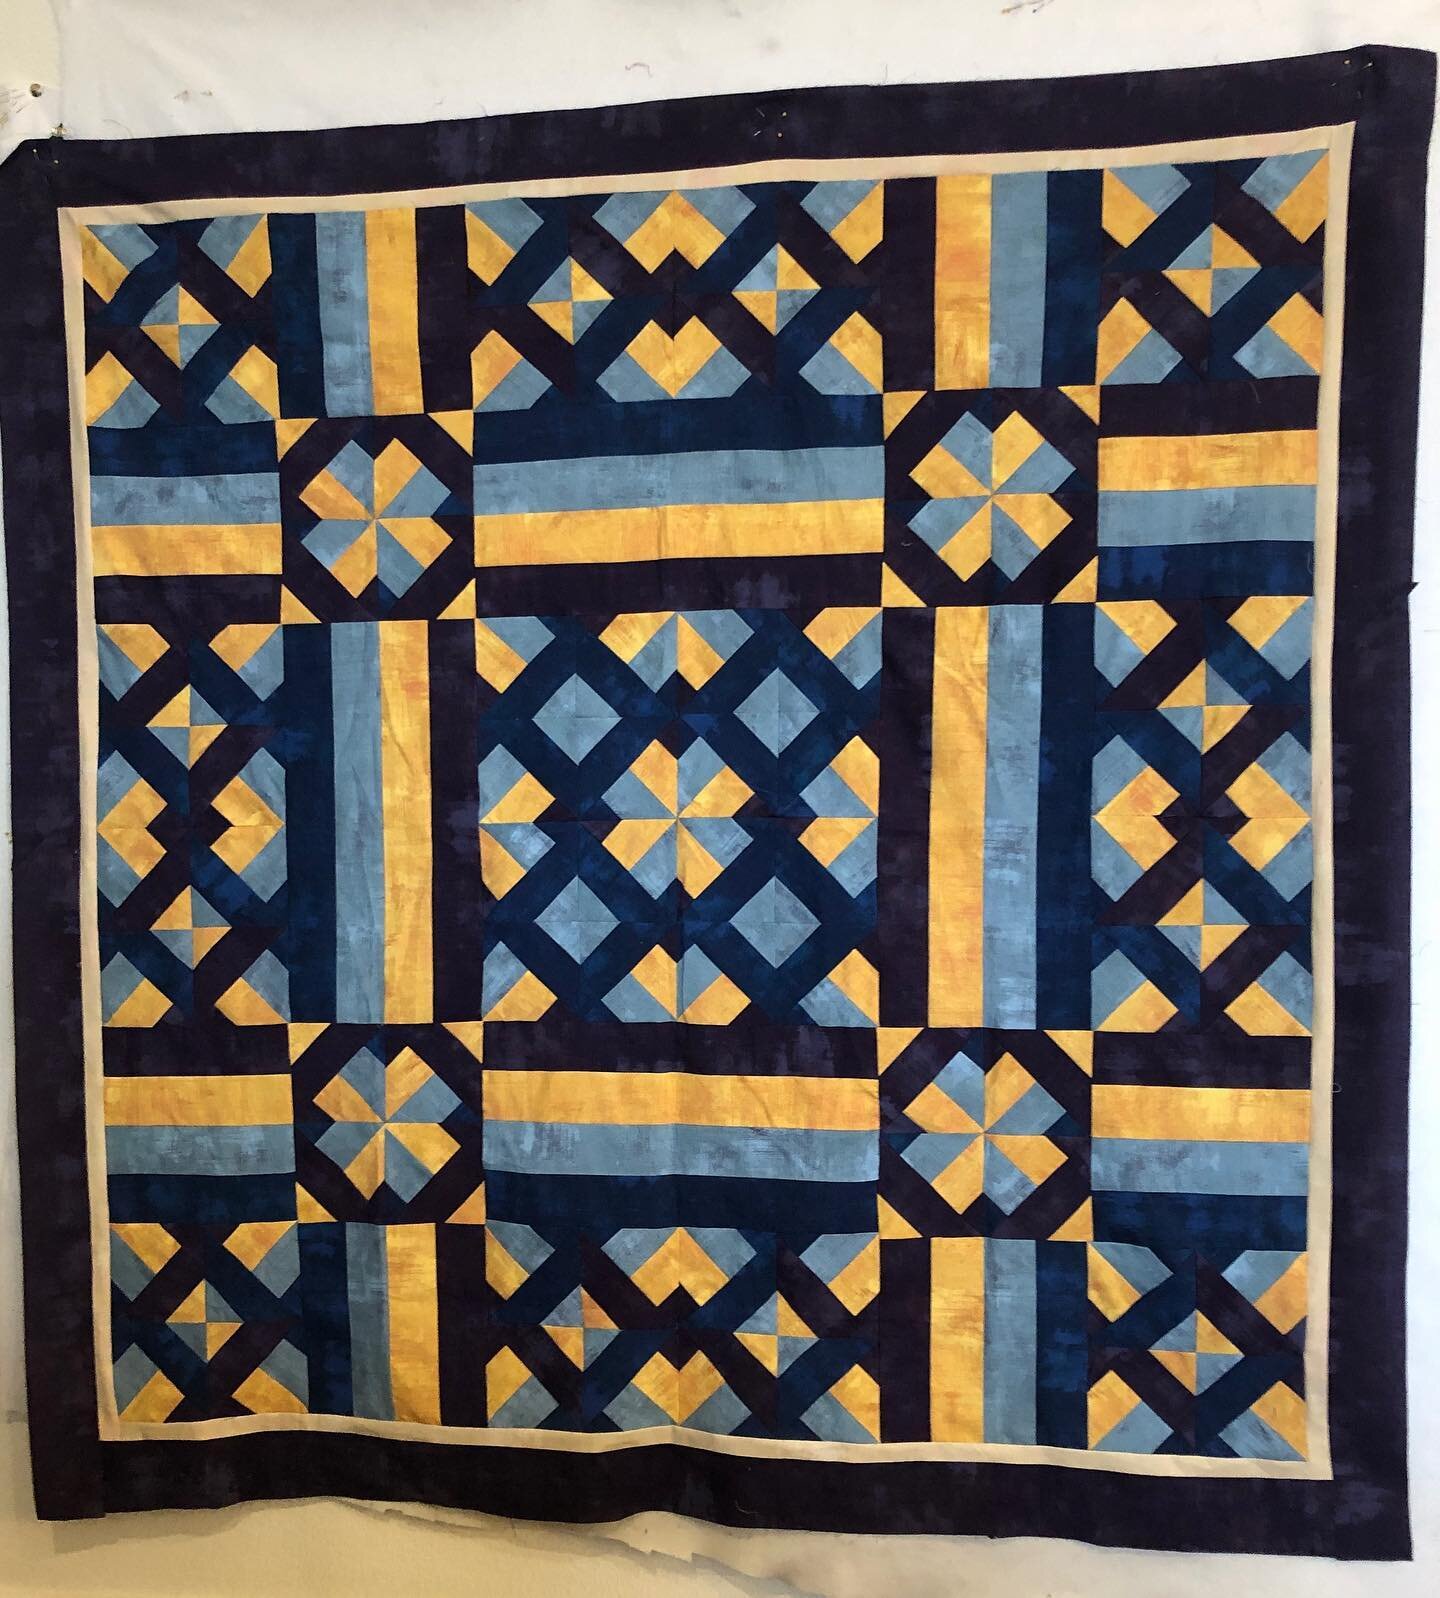 So proud of @just__maha_ibrahim for this beautiful MQ5 finish!!! First quilt ever and it is magnificent!!! Well done you.  #hellostitchstudiomysteryquilt